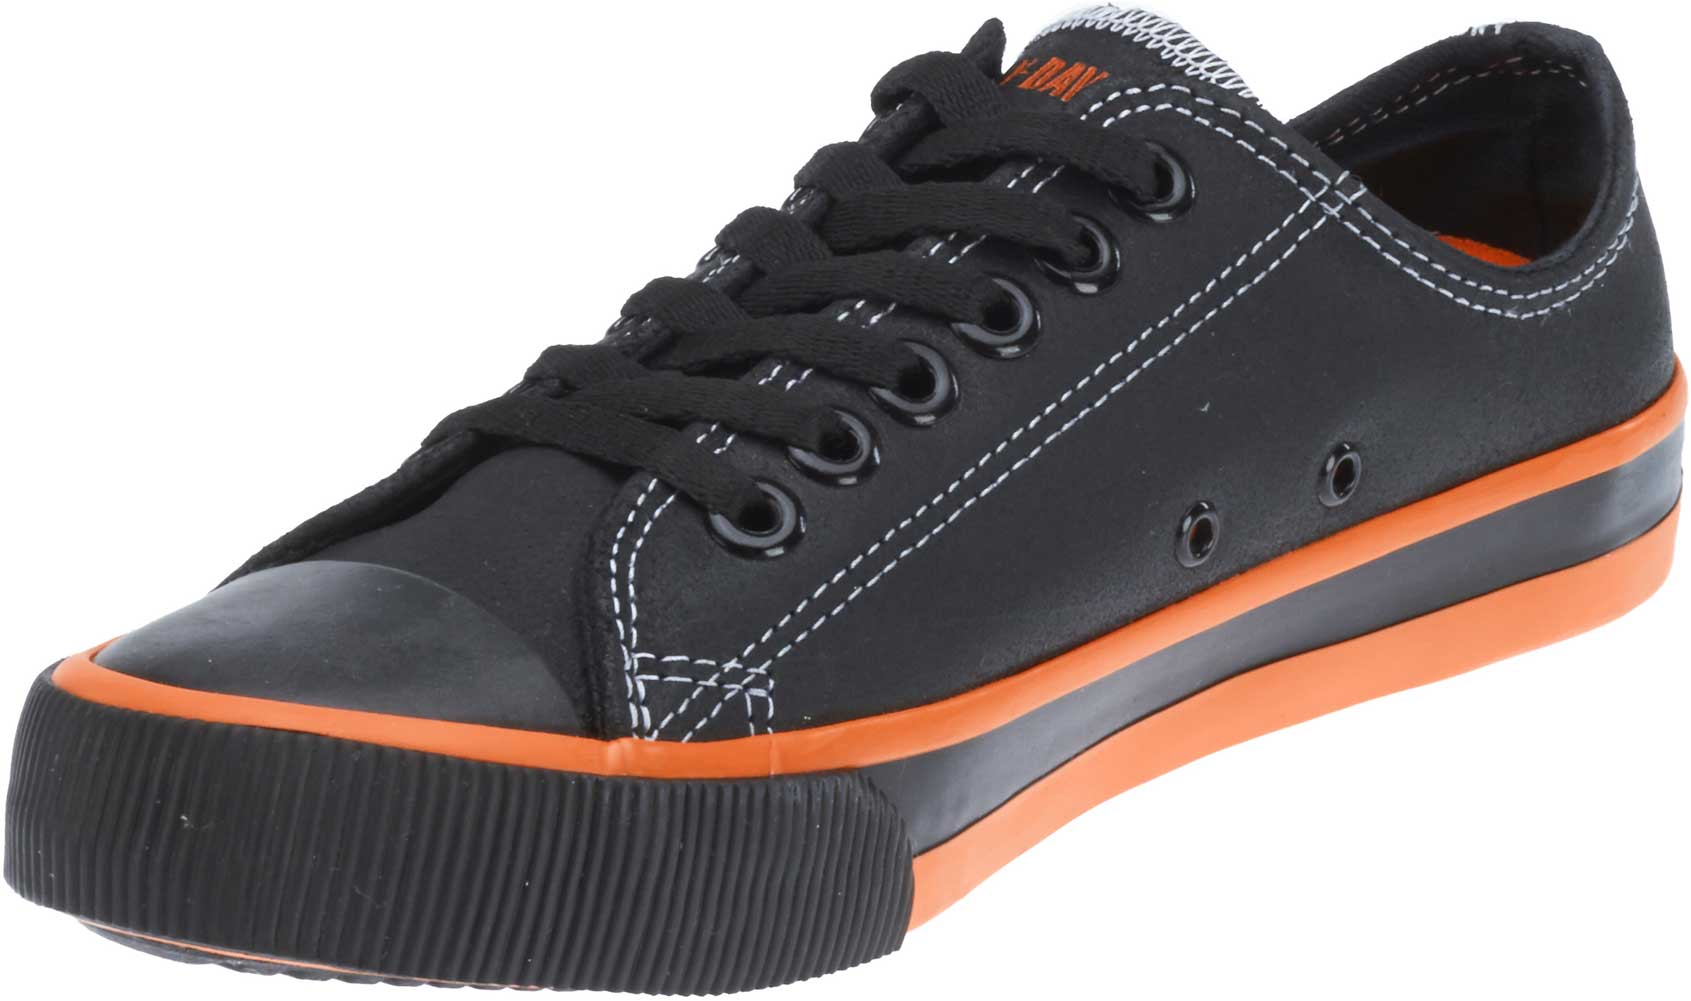 harley davidson womens casual shoes